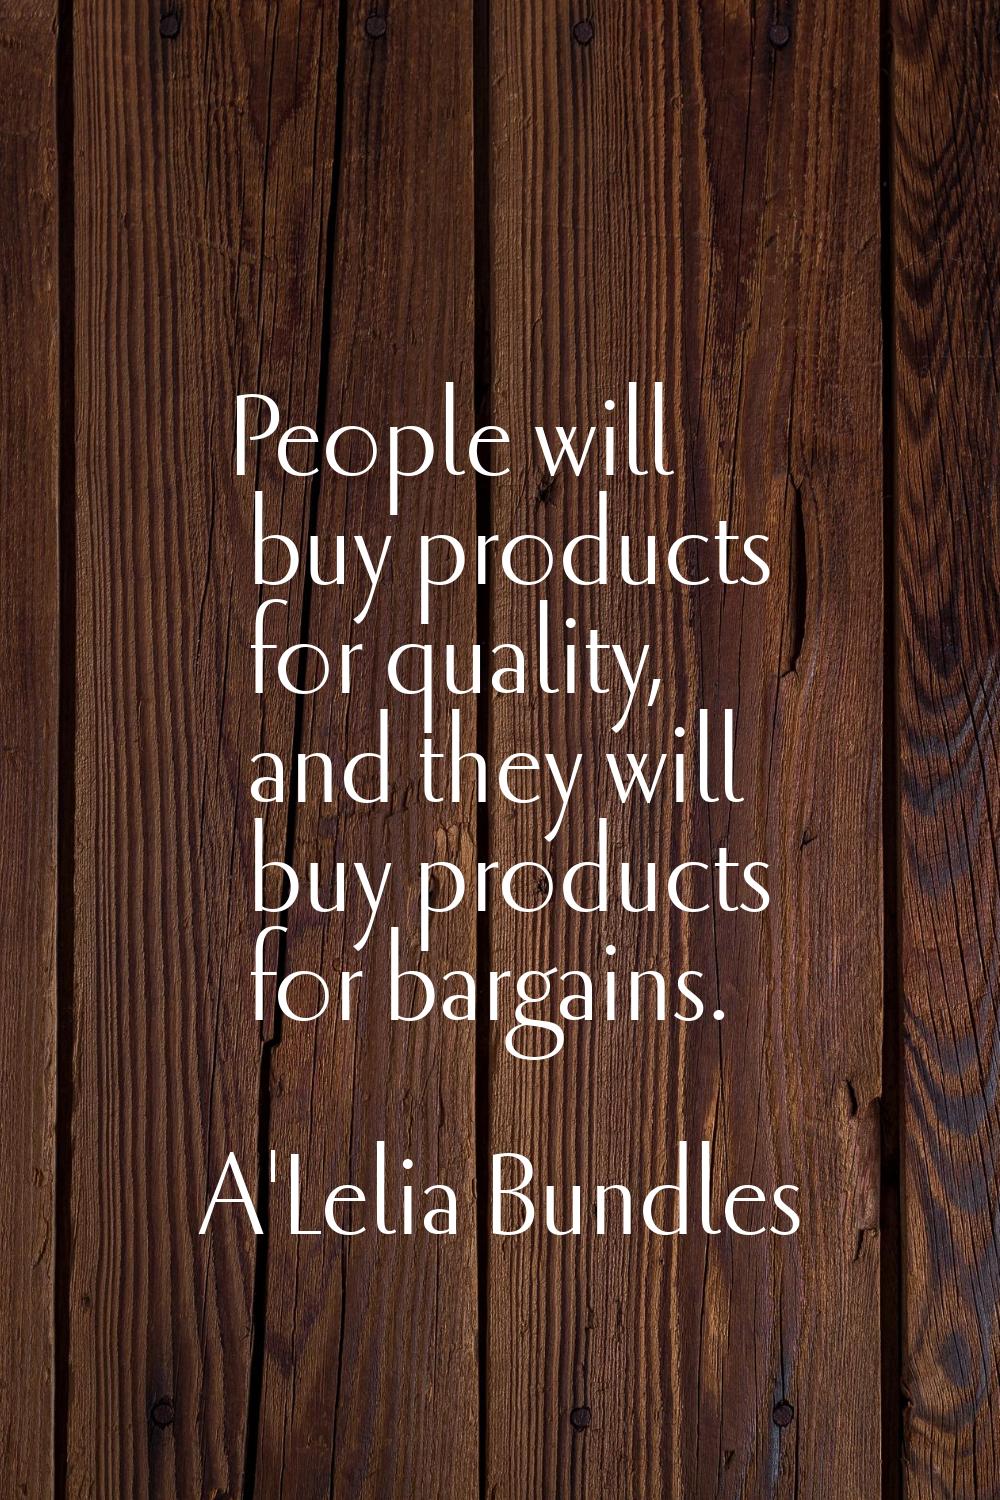 People will buy products for quality, and they will buy products for bargains.